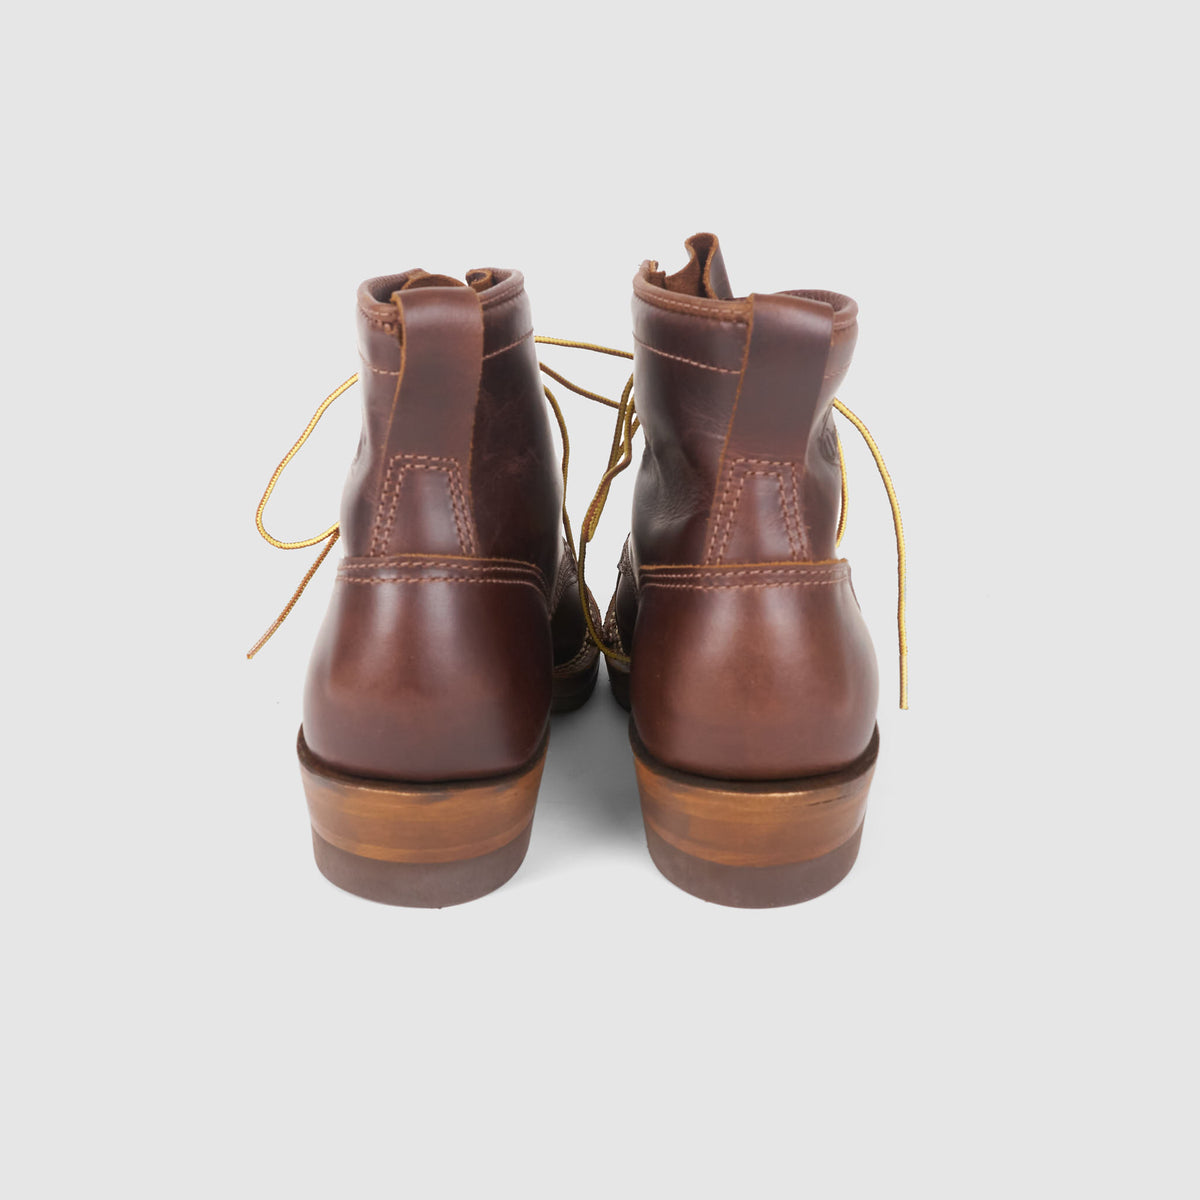 Wesco Custom Lace Up Waxed Leather Dress Boot